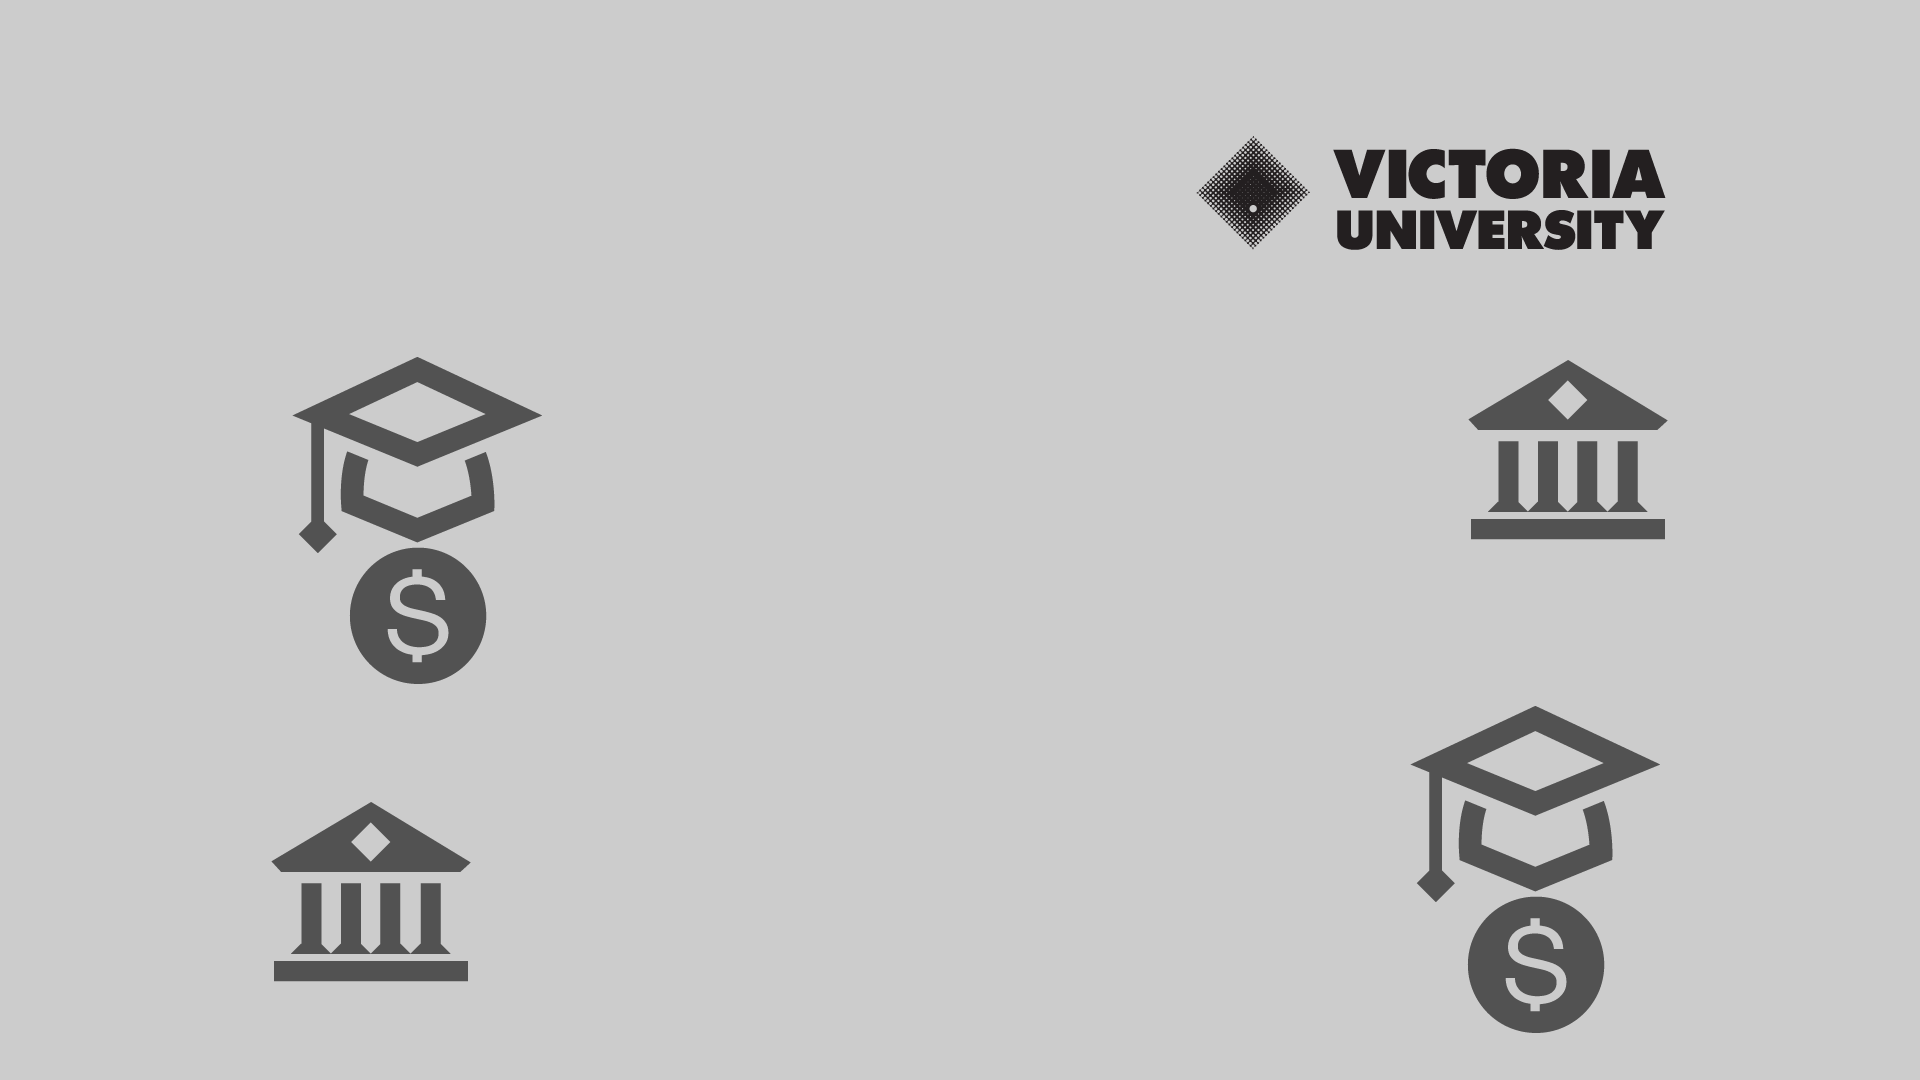 Zoom Virtual Background for VU Business School